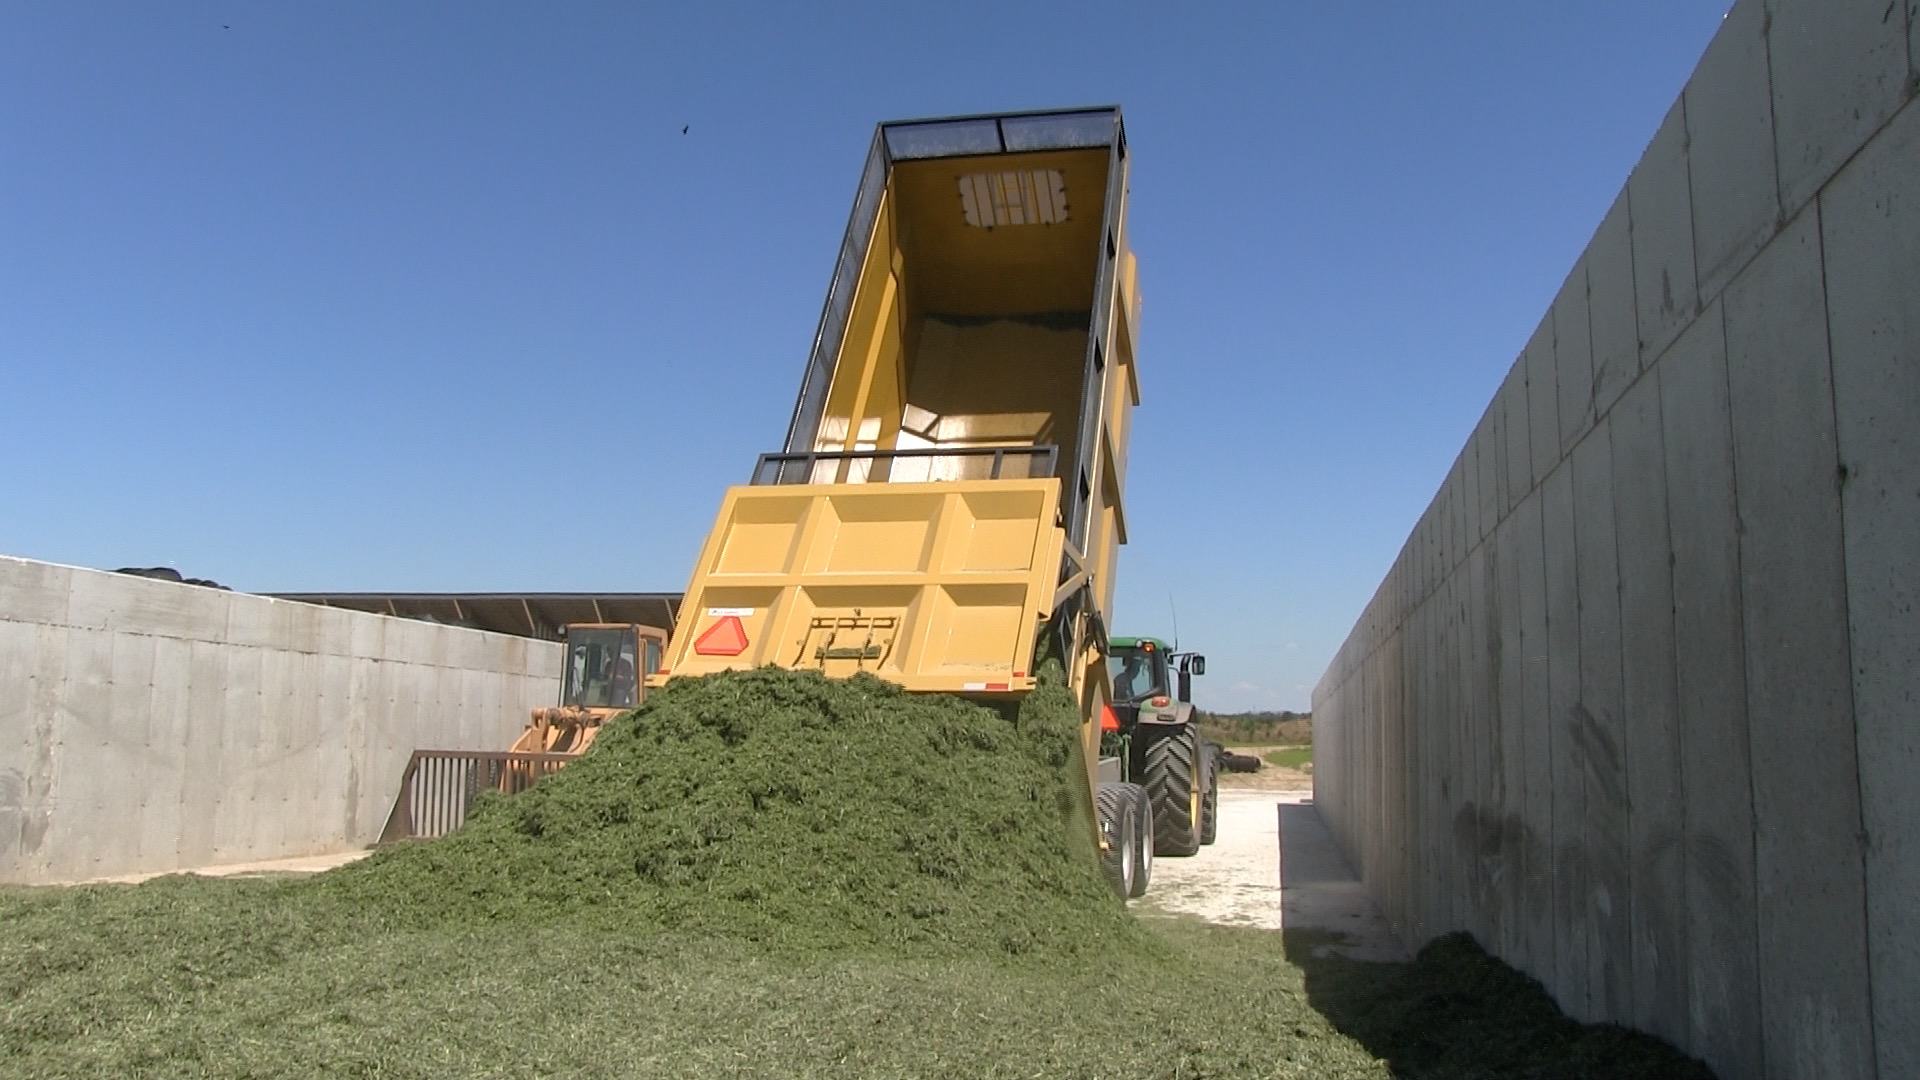 An image of the 20 ton silage dump trailer dumping hay silage